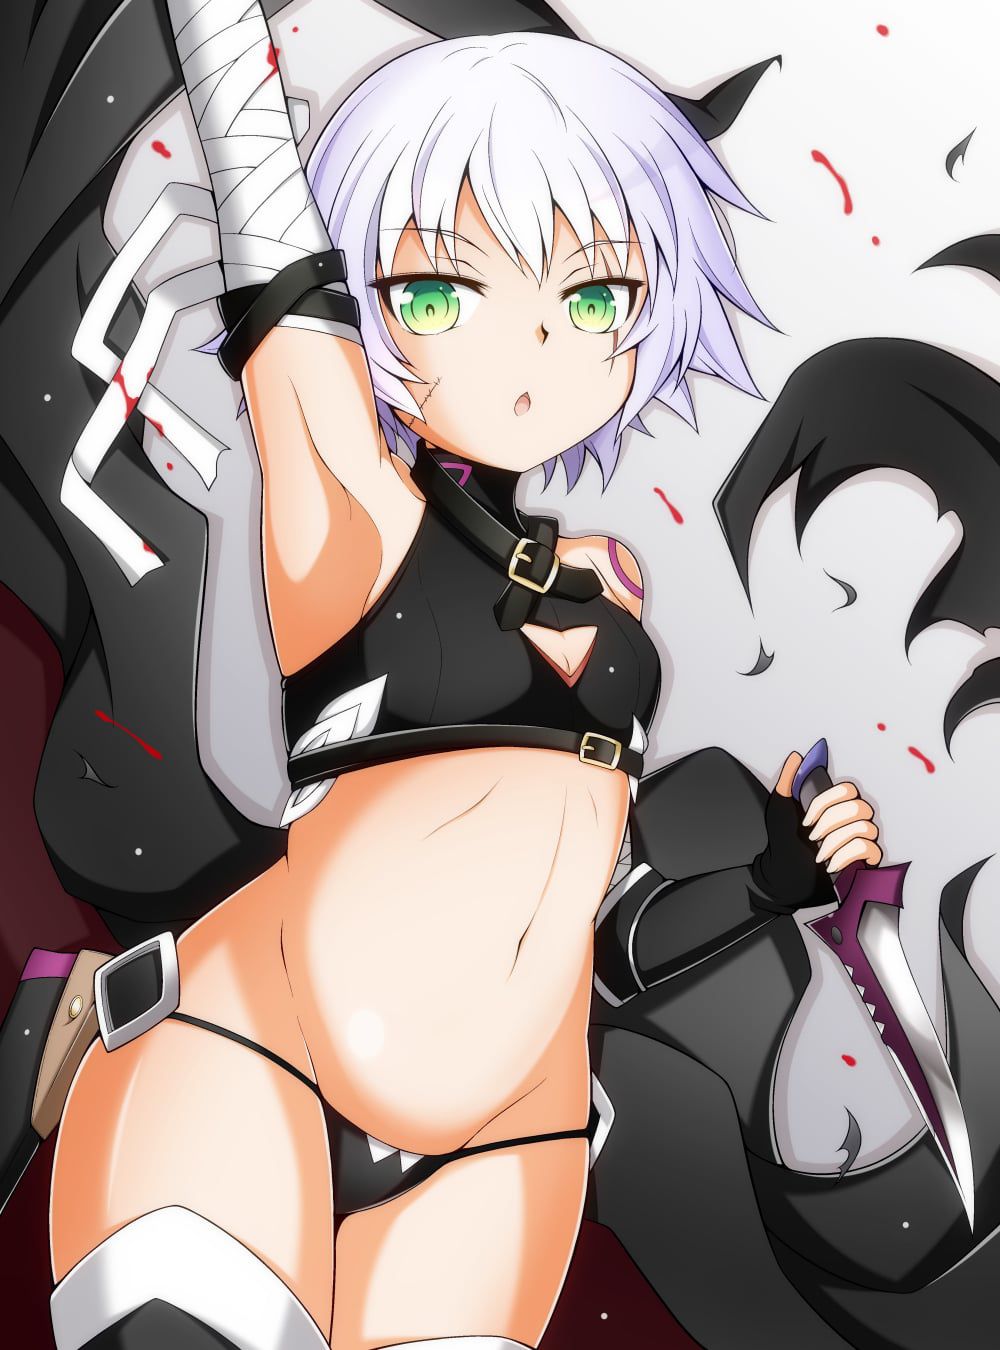 Cute MoE [FateGO] Jack the Ripper erotic images part 2 11